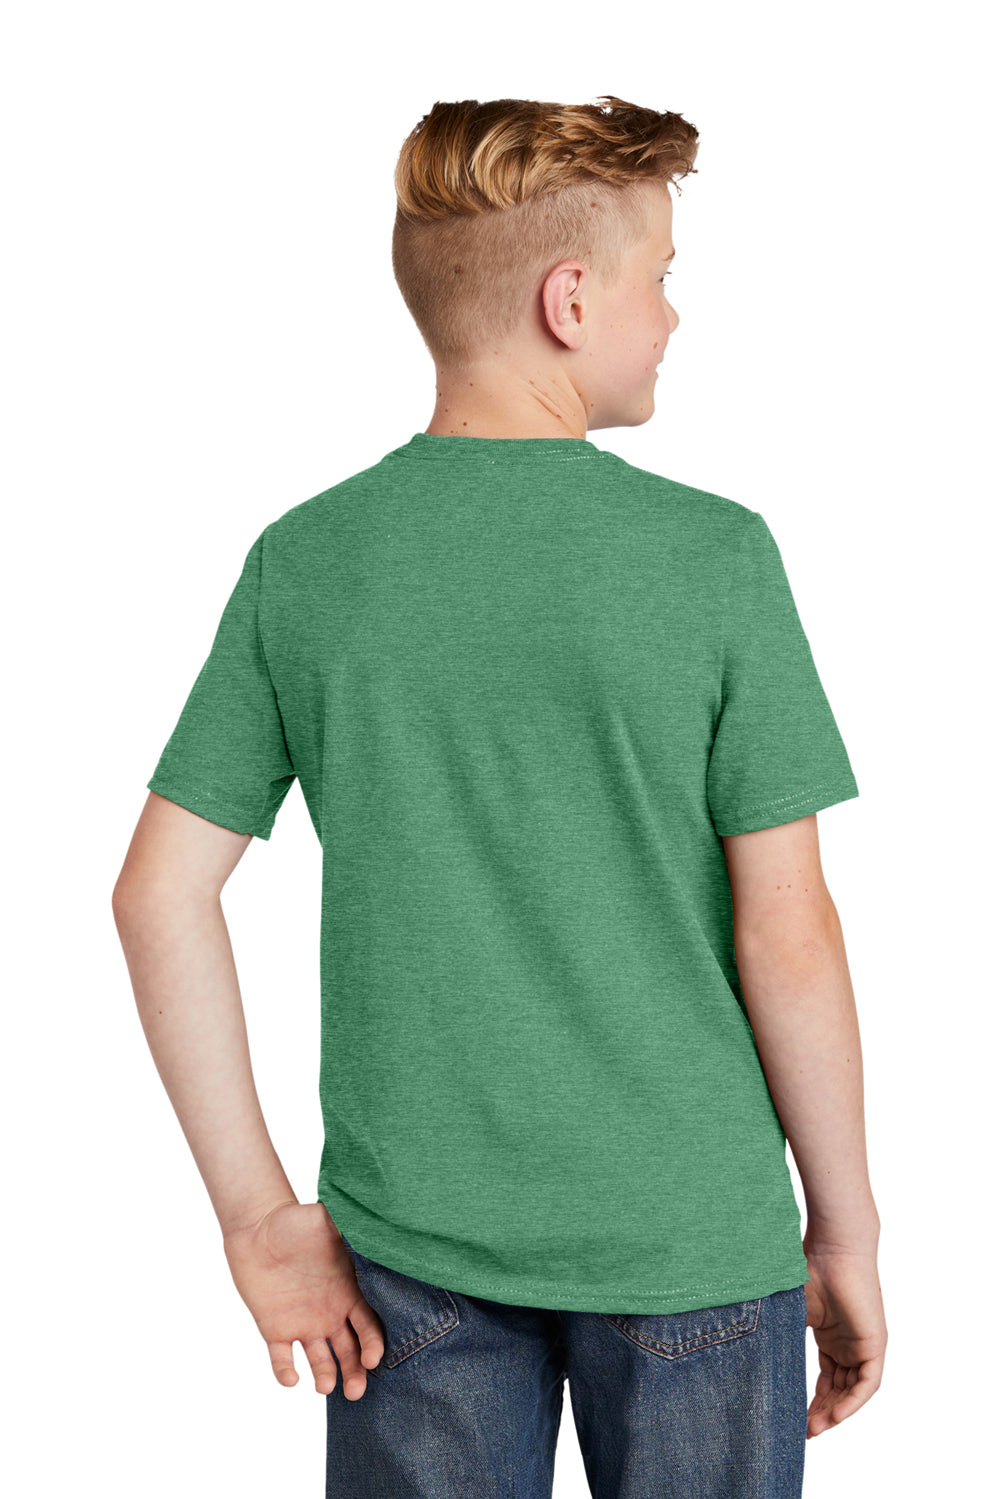 District DT6000Y Youth Very Important Short Sleeve Crewneck T-Shirt Heather Kelly Green Back